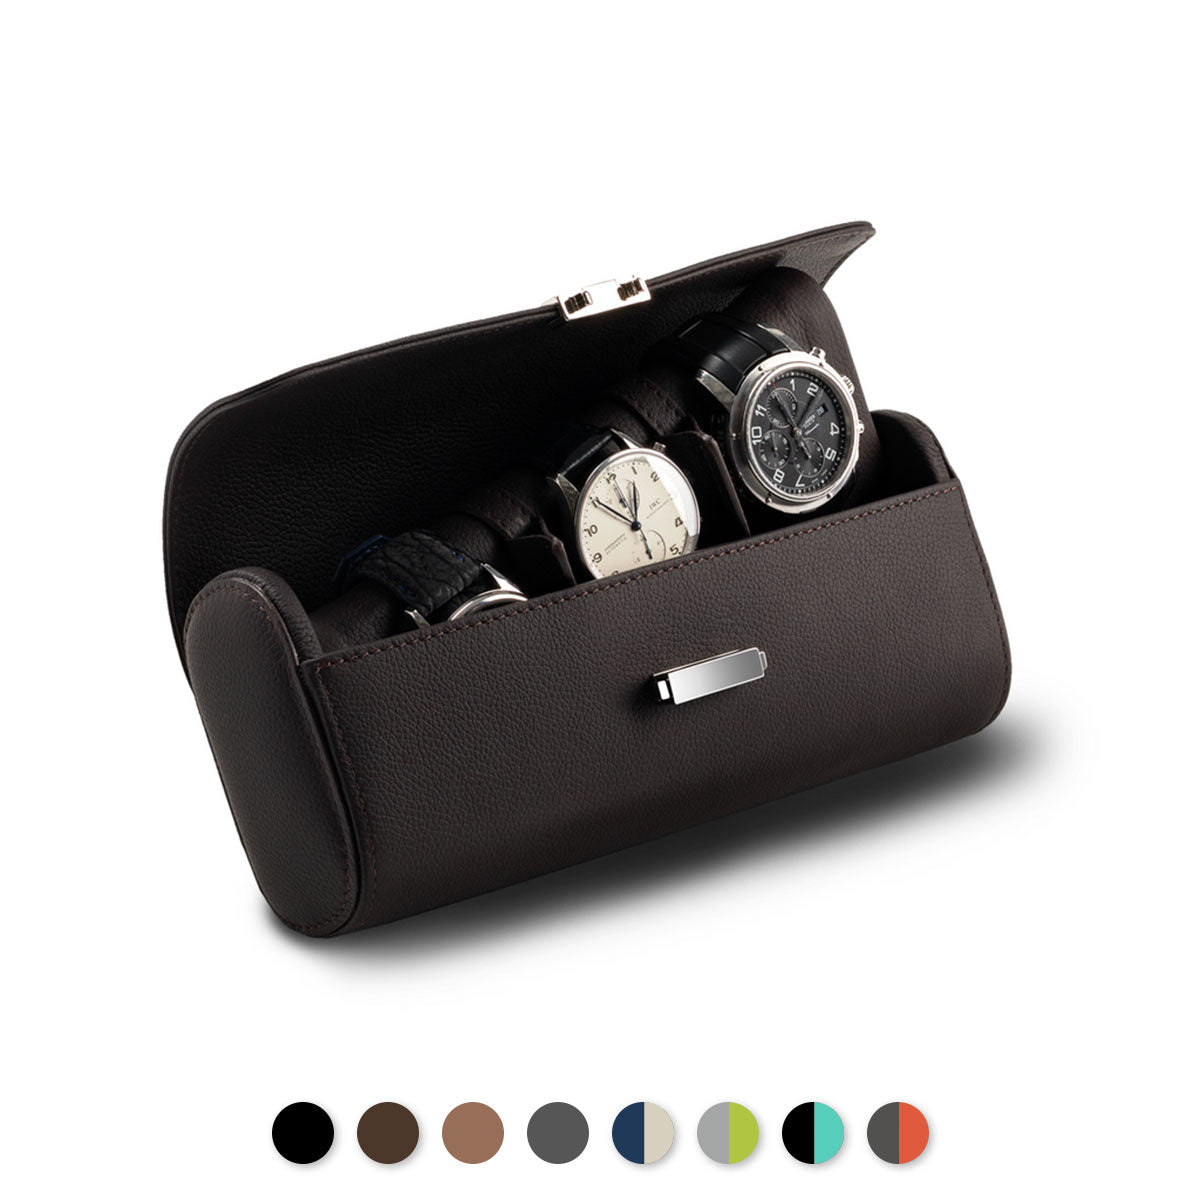 Scatola del Tempo - 4 watches leather carrying case Pochette